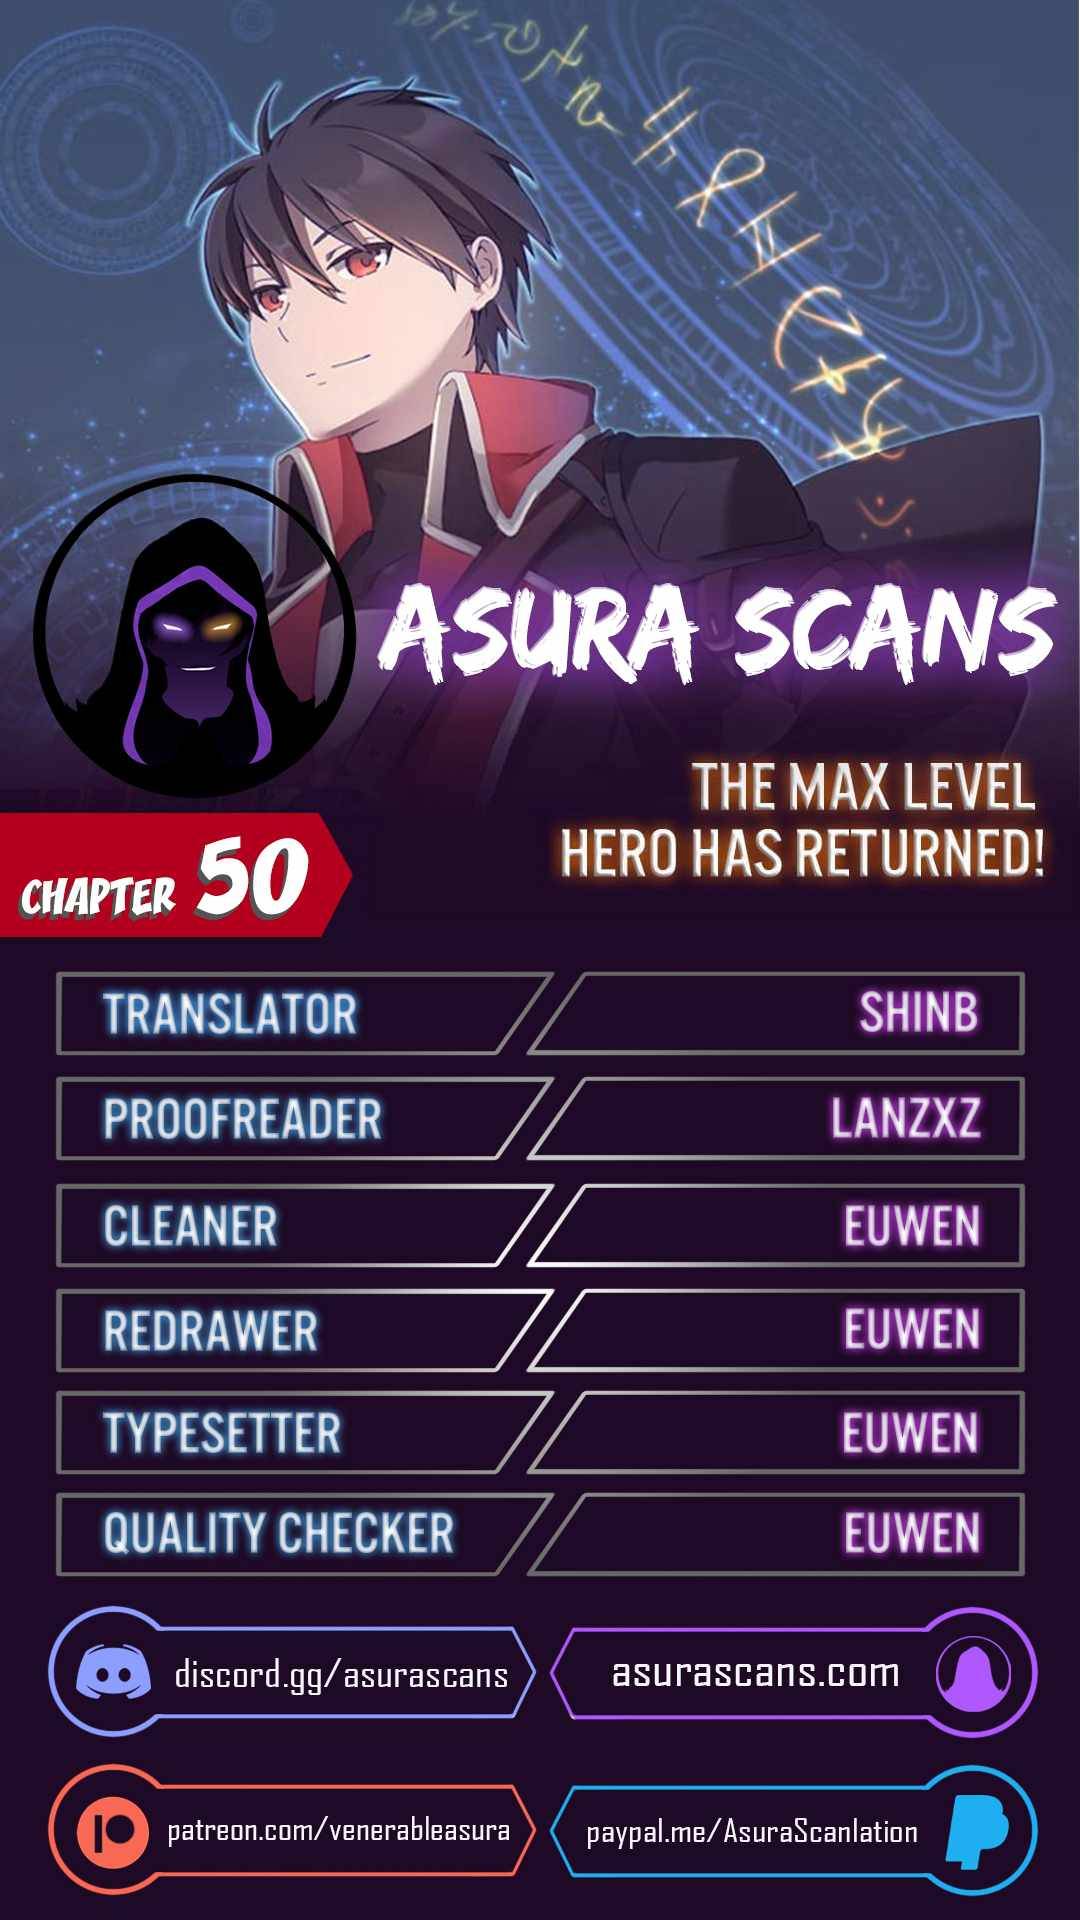 The Max Level Hero Has Returned! - Page 1